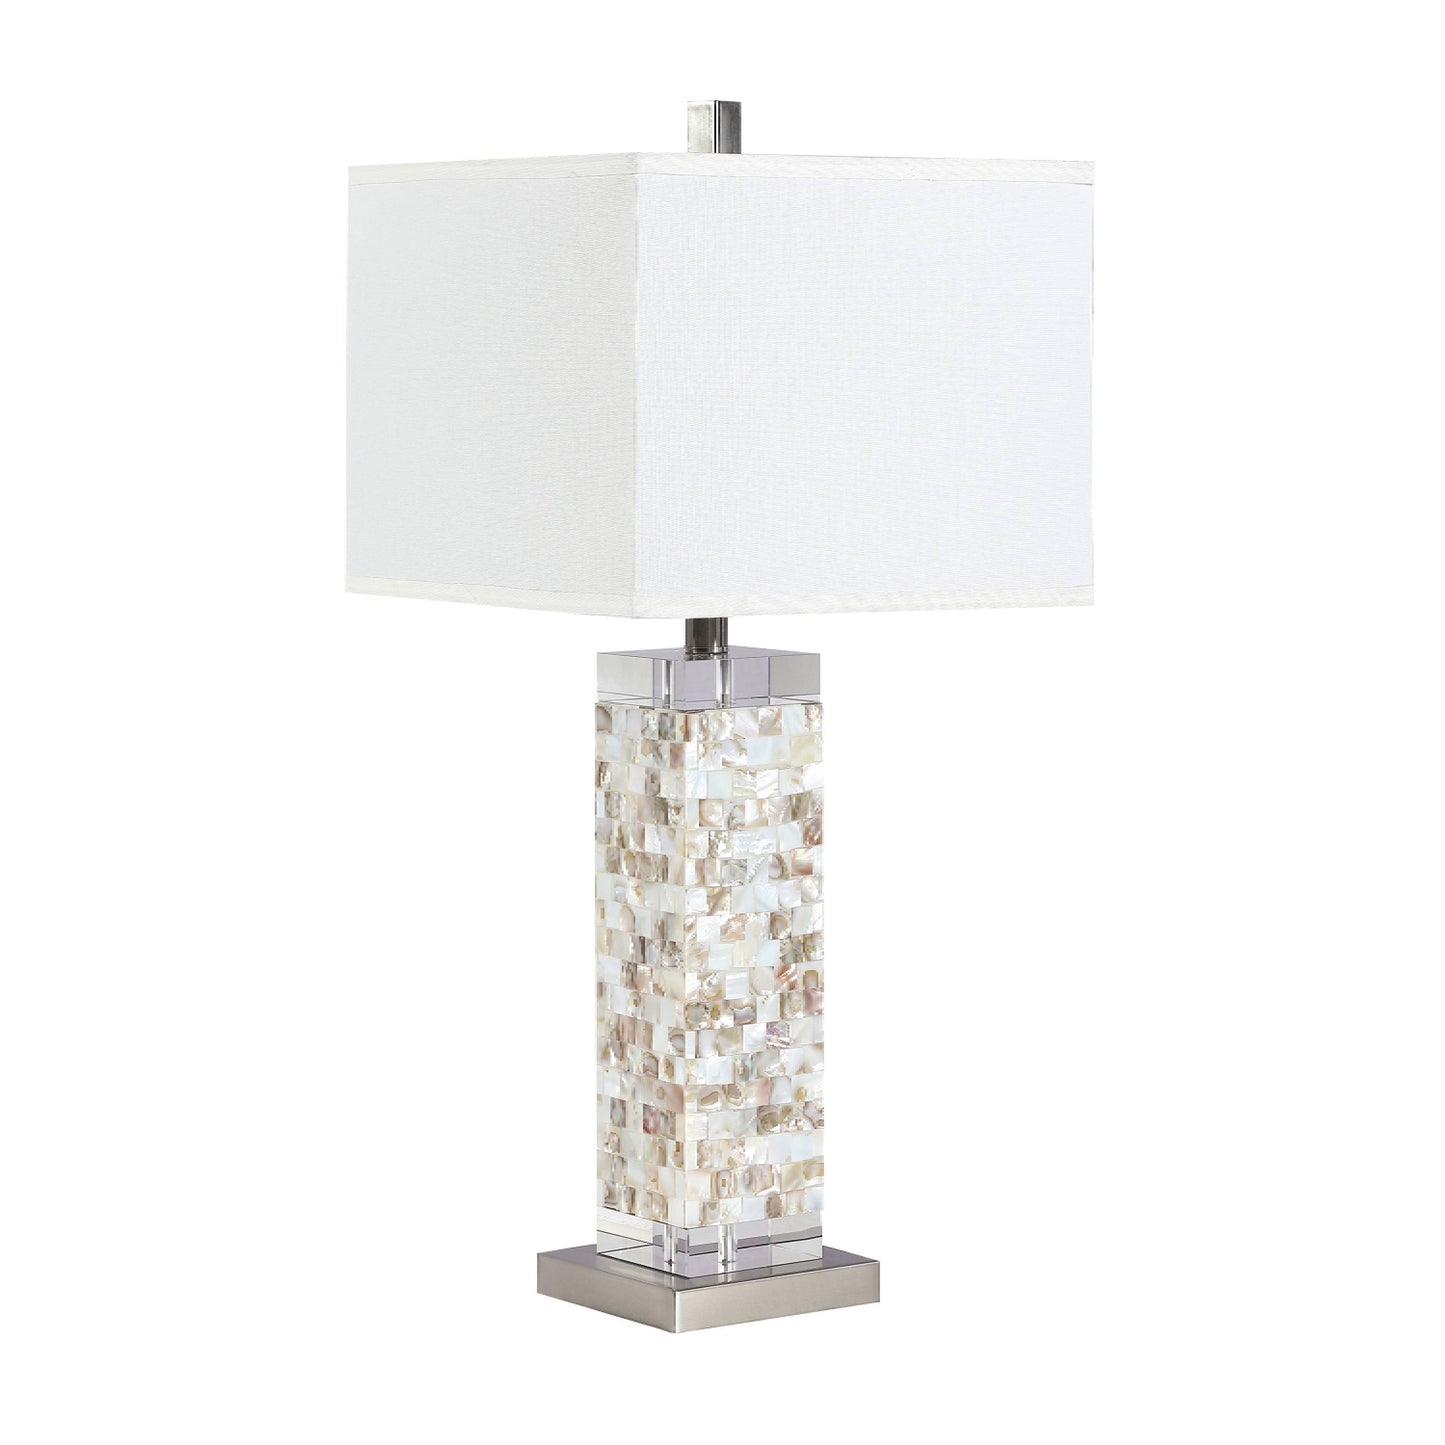 Square Shade Table Lamp With Crystal Base White And Silver - 923281